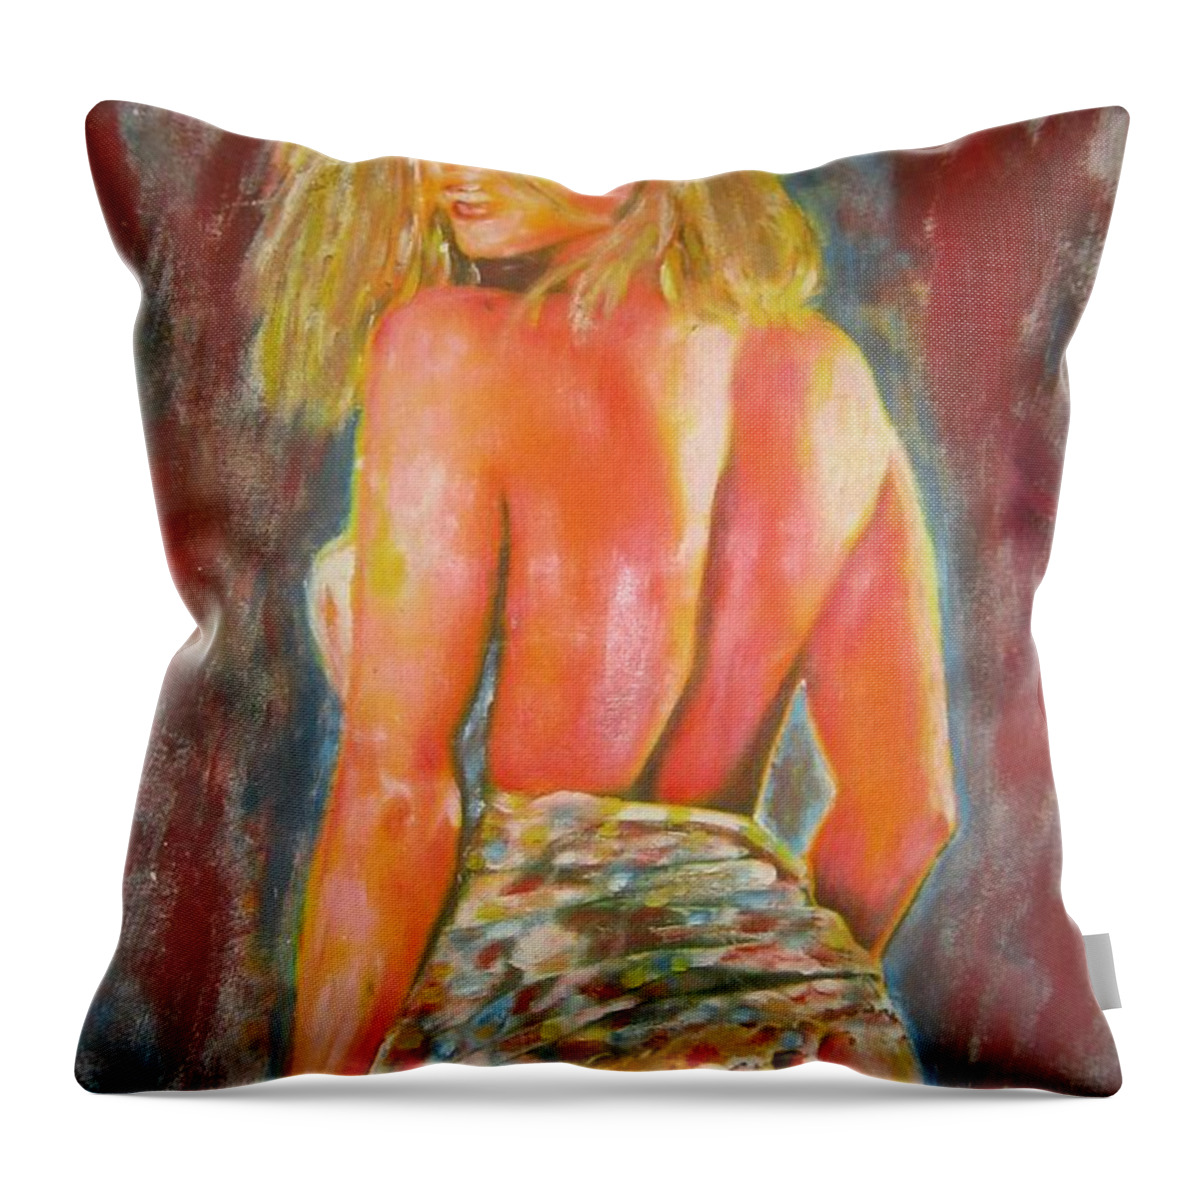 Nude Oil Painting Throw Pillow featuring the painting Soho Model by Sam Shaker